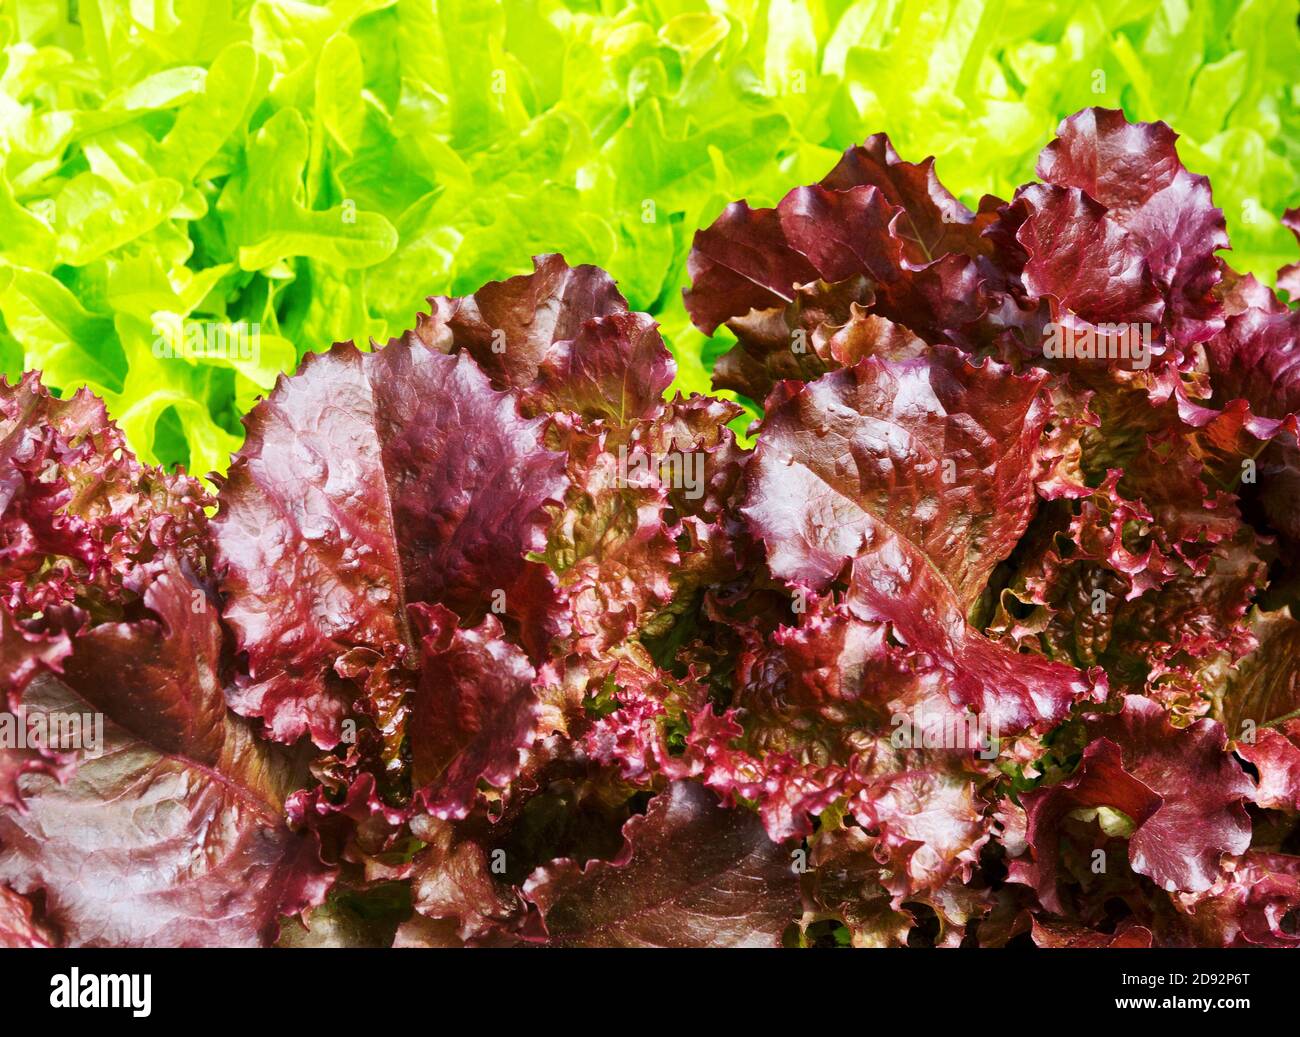 Lettuce  leaf salad. Lettuce as a nature background texture. Multicolor  lettuce leaves. Lactuca sativa red, green leaves, close up. Stock Photo